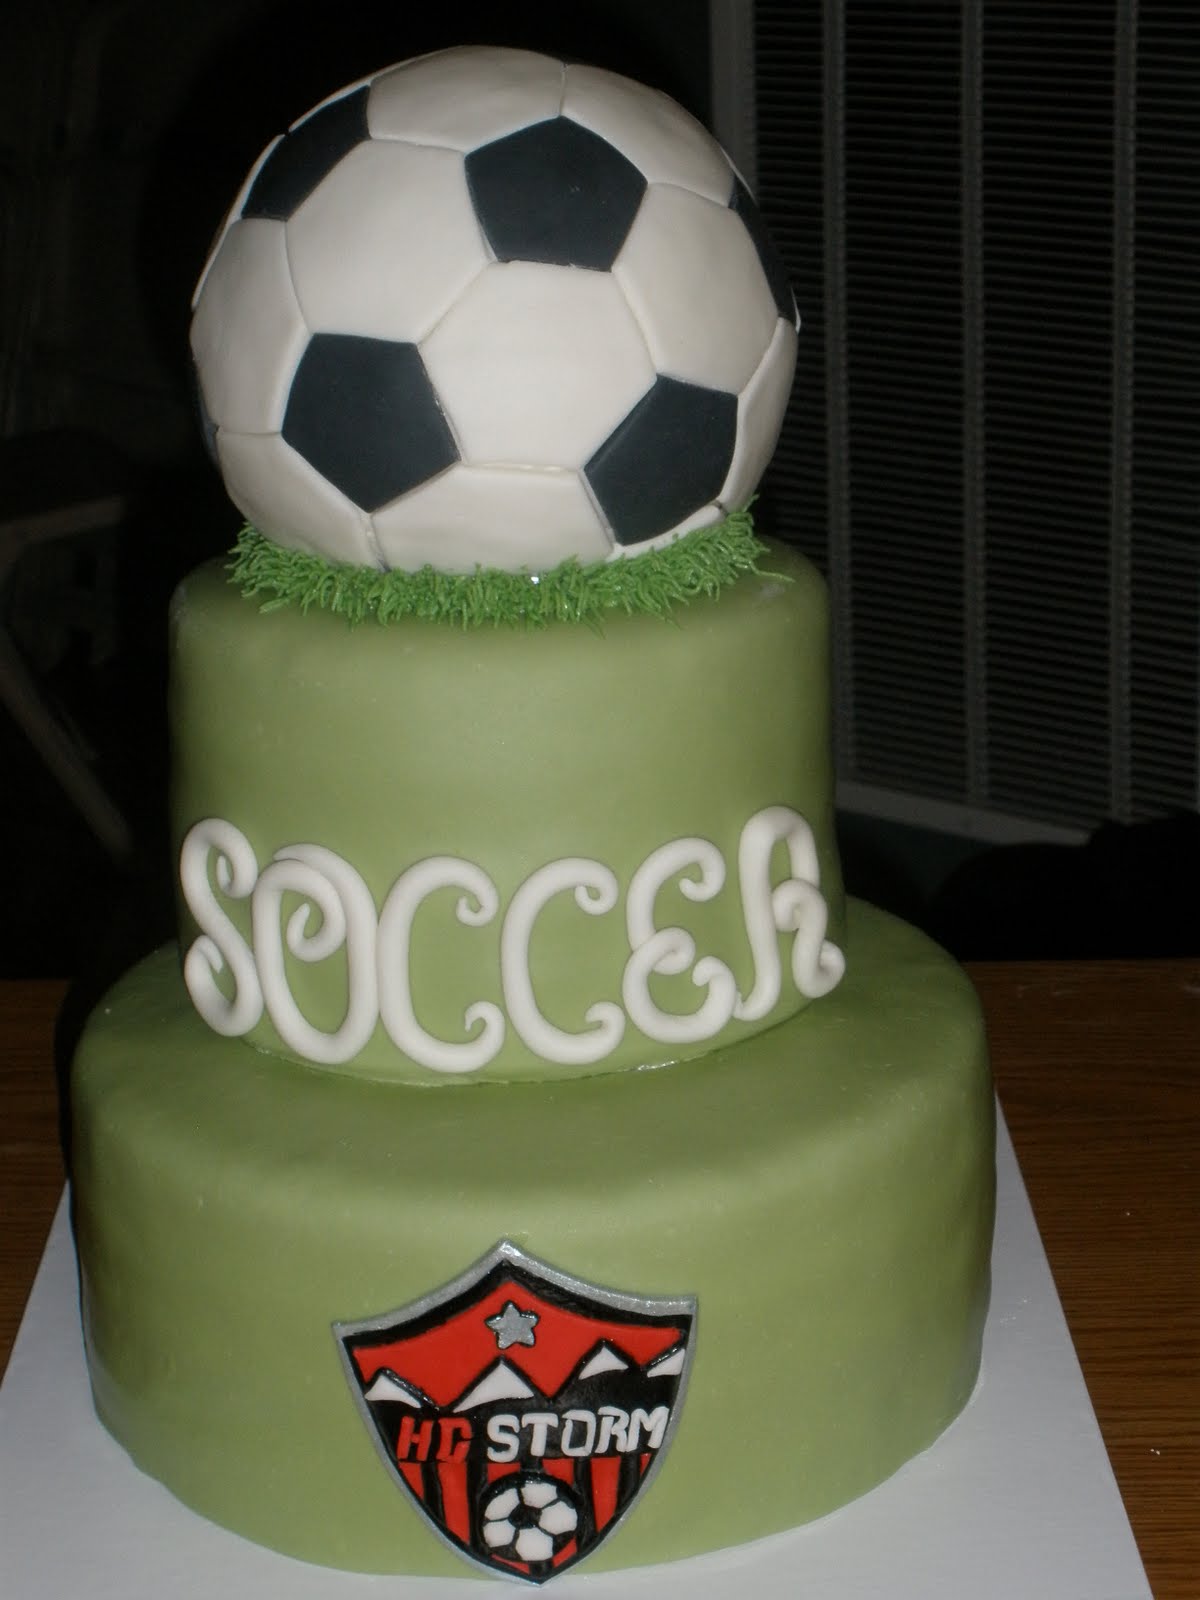 It's a piece of cake: Soccer Ball Cake